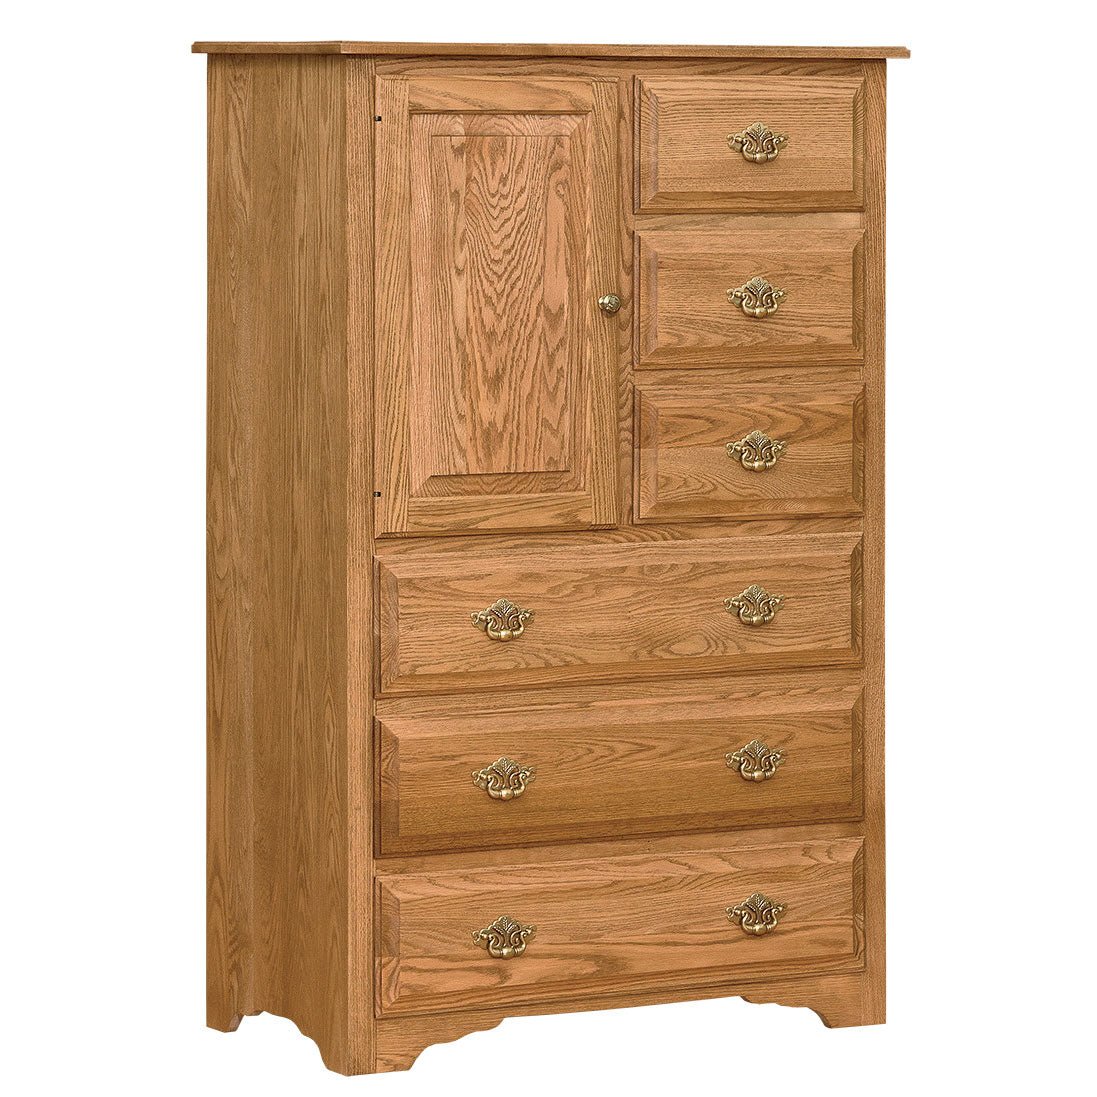 Eden Amish Country Gentleman's Chest - snyders.furniture